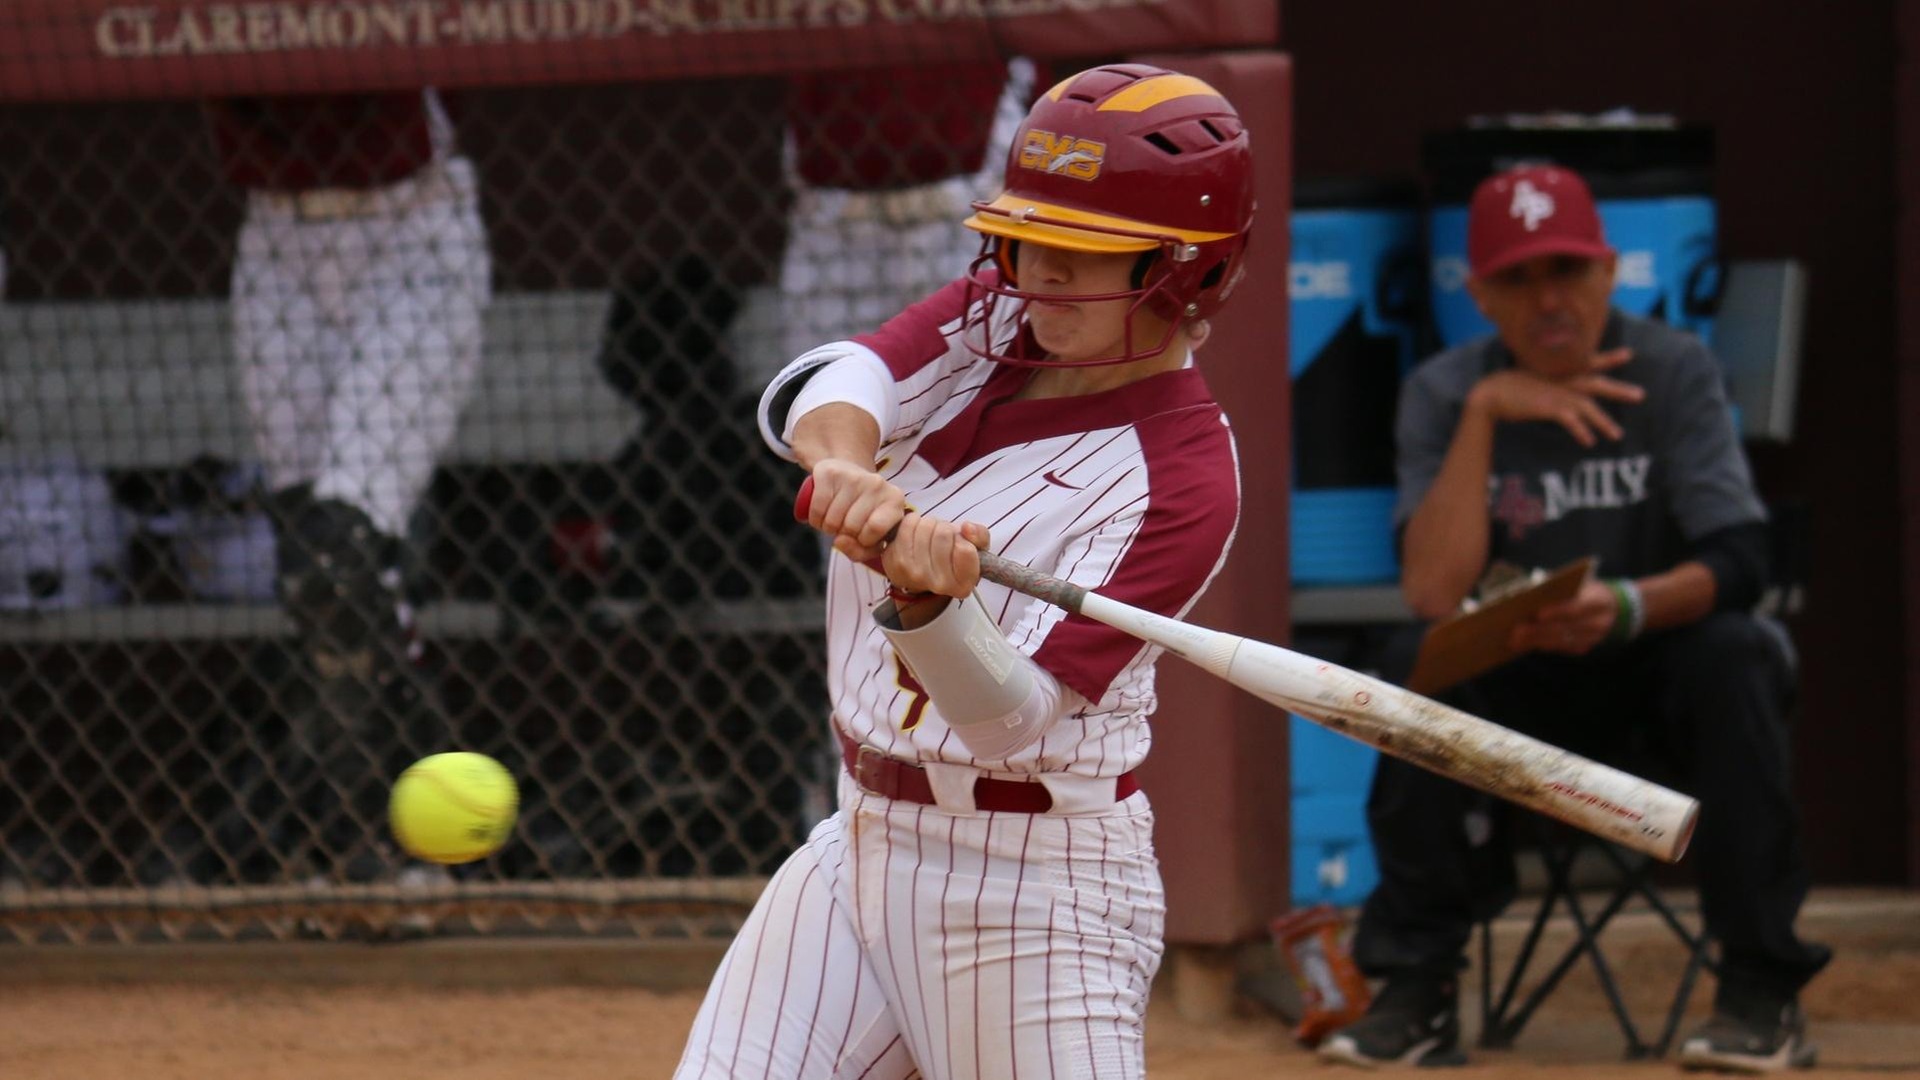 Destiny Garcia doubles in her first college at-bat